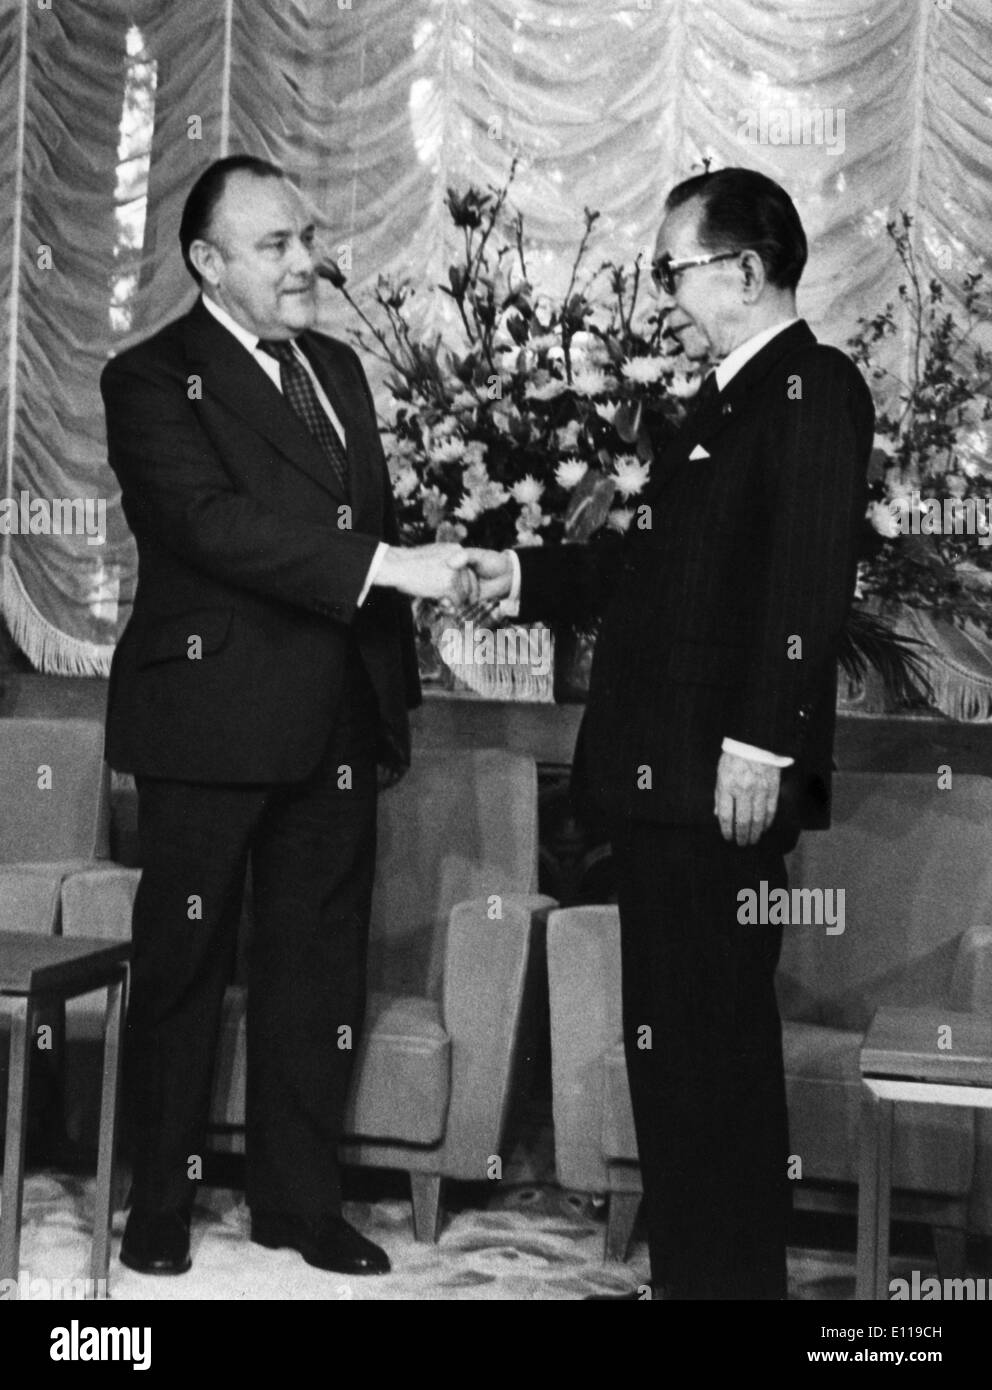 Apr. 23, 1976 - Tokyo, Japan - Prime Minister of New Zealand ROBERT MULDOON is greeted by Japanese Prime Minister TAKEO MIKI on Stock Photo